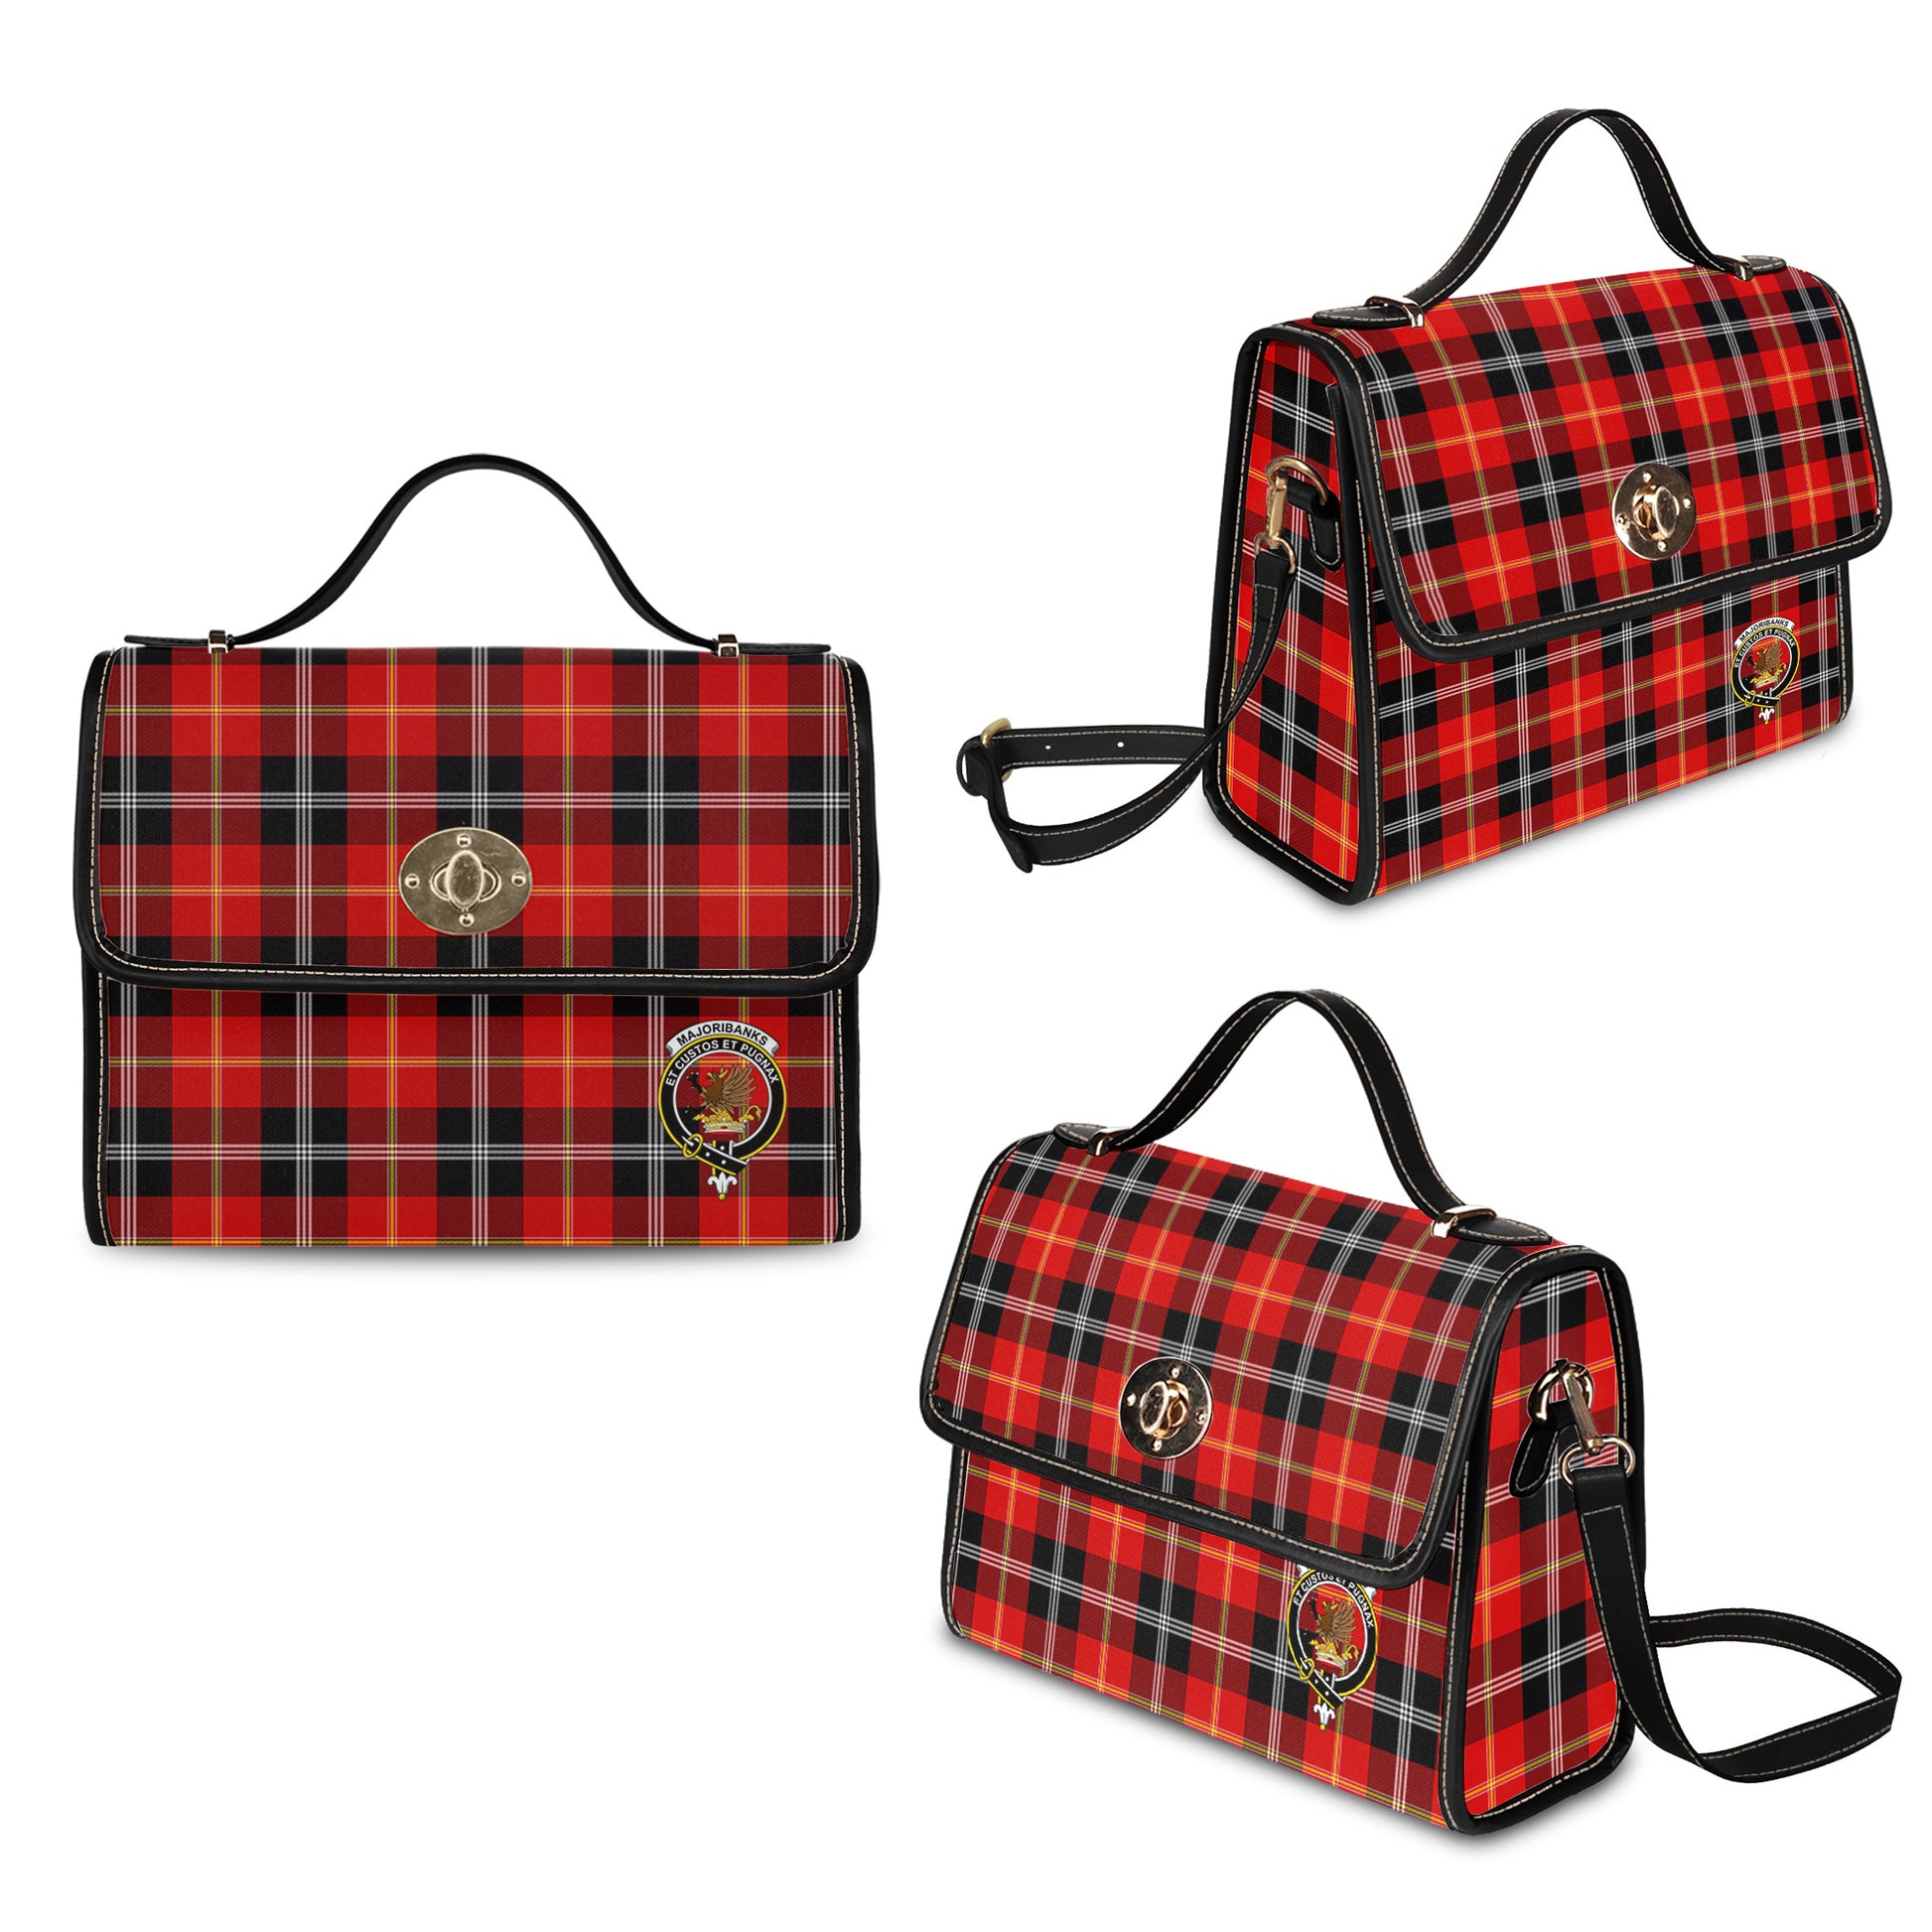 majoribanks-tartan-leather-strap-waterproof-canvas-bag-with-family-crest